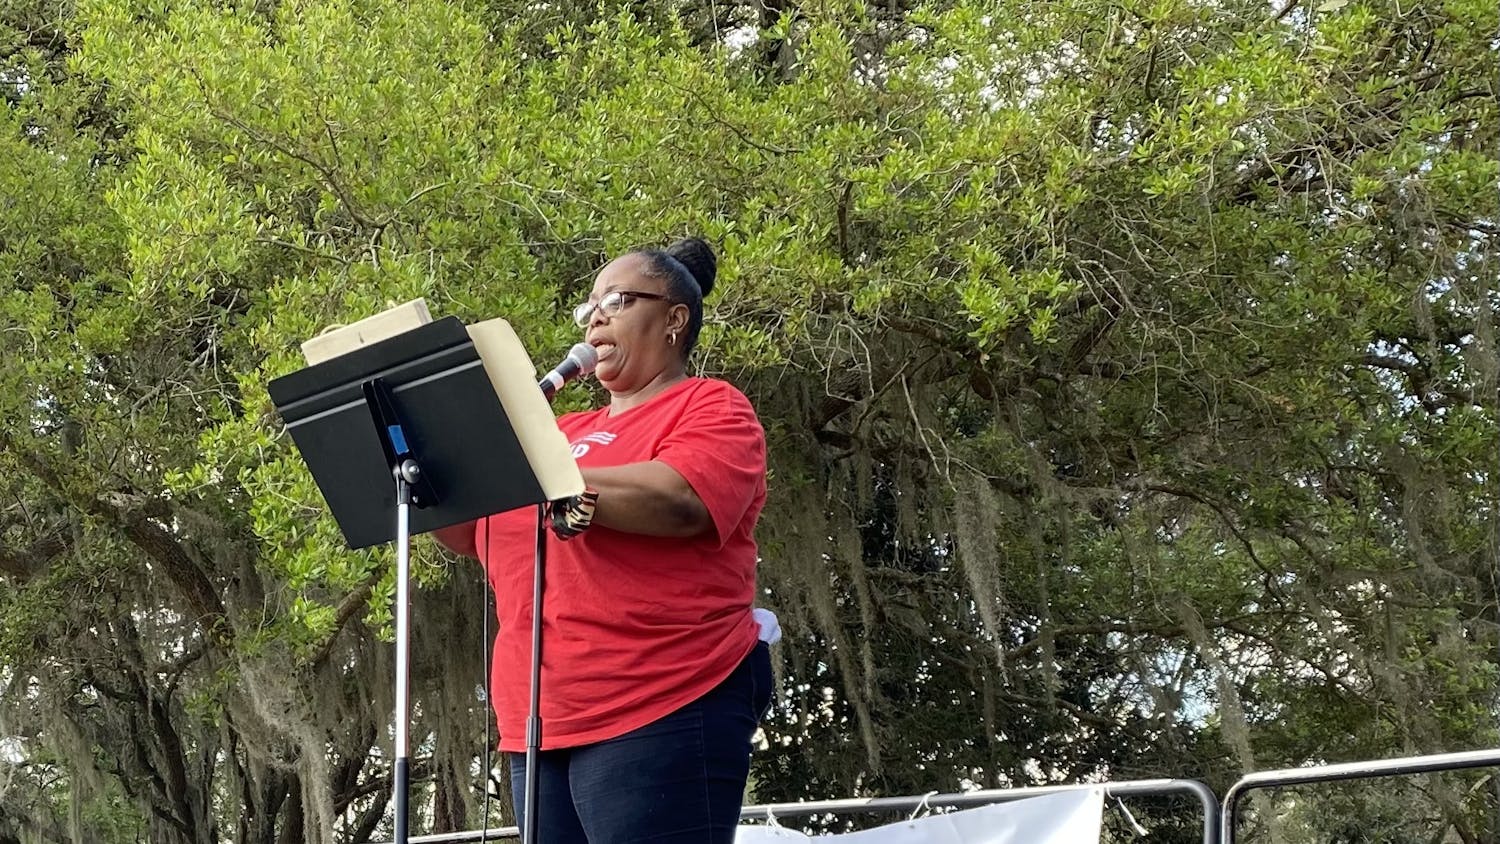 
Robin Lillie sings “The Greatest Love of All” at the Moms Demand Action for Gun Sense in America's Day of Action on Sunday, Feb. 27